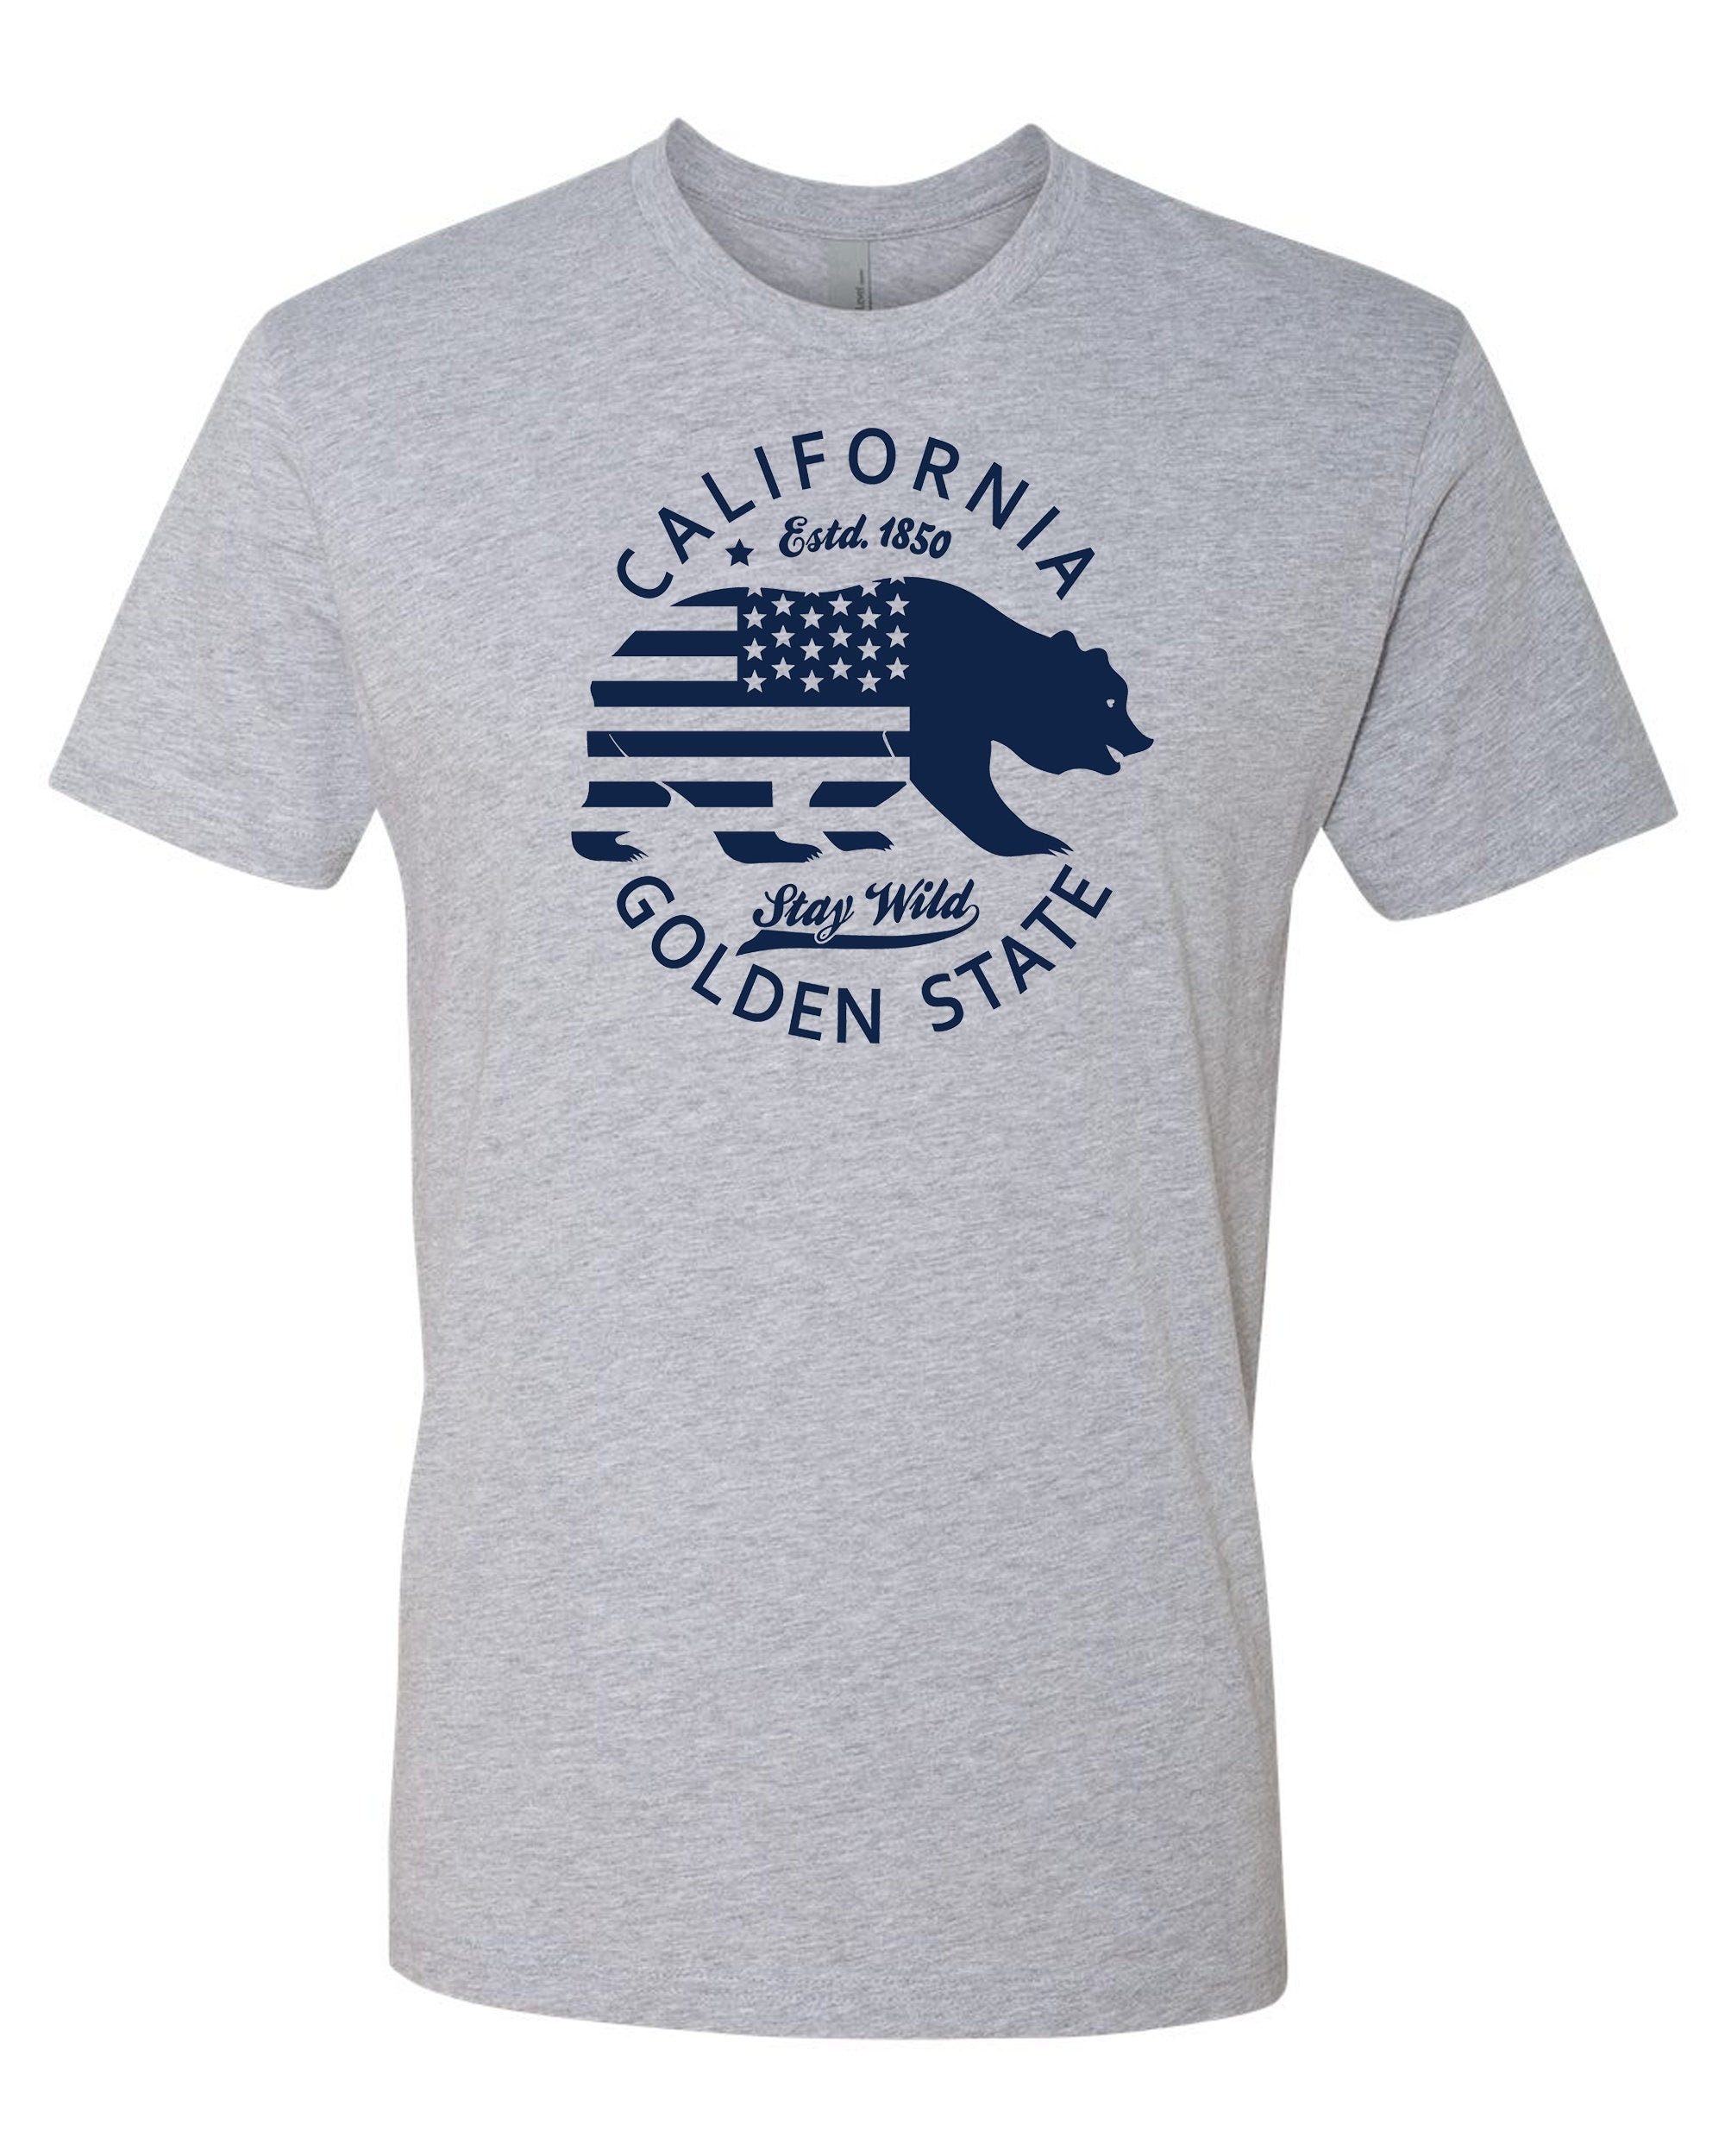 California Republic Novelty T Shirt The Golden State West | Etsy